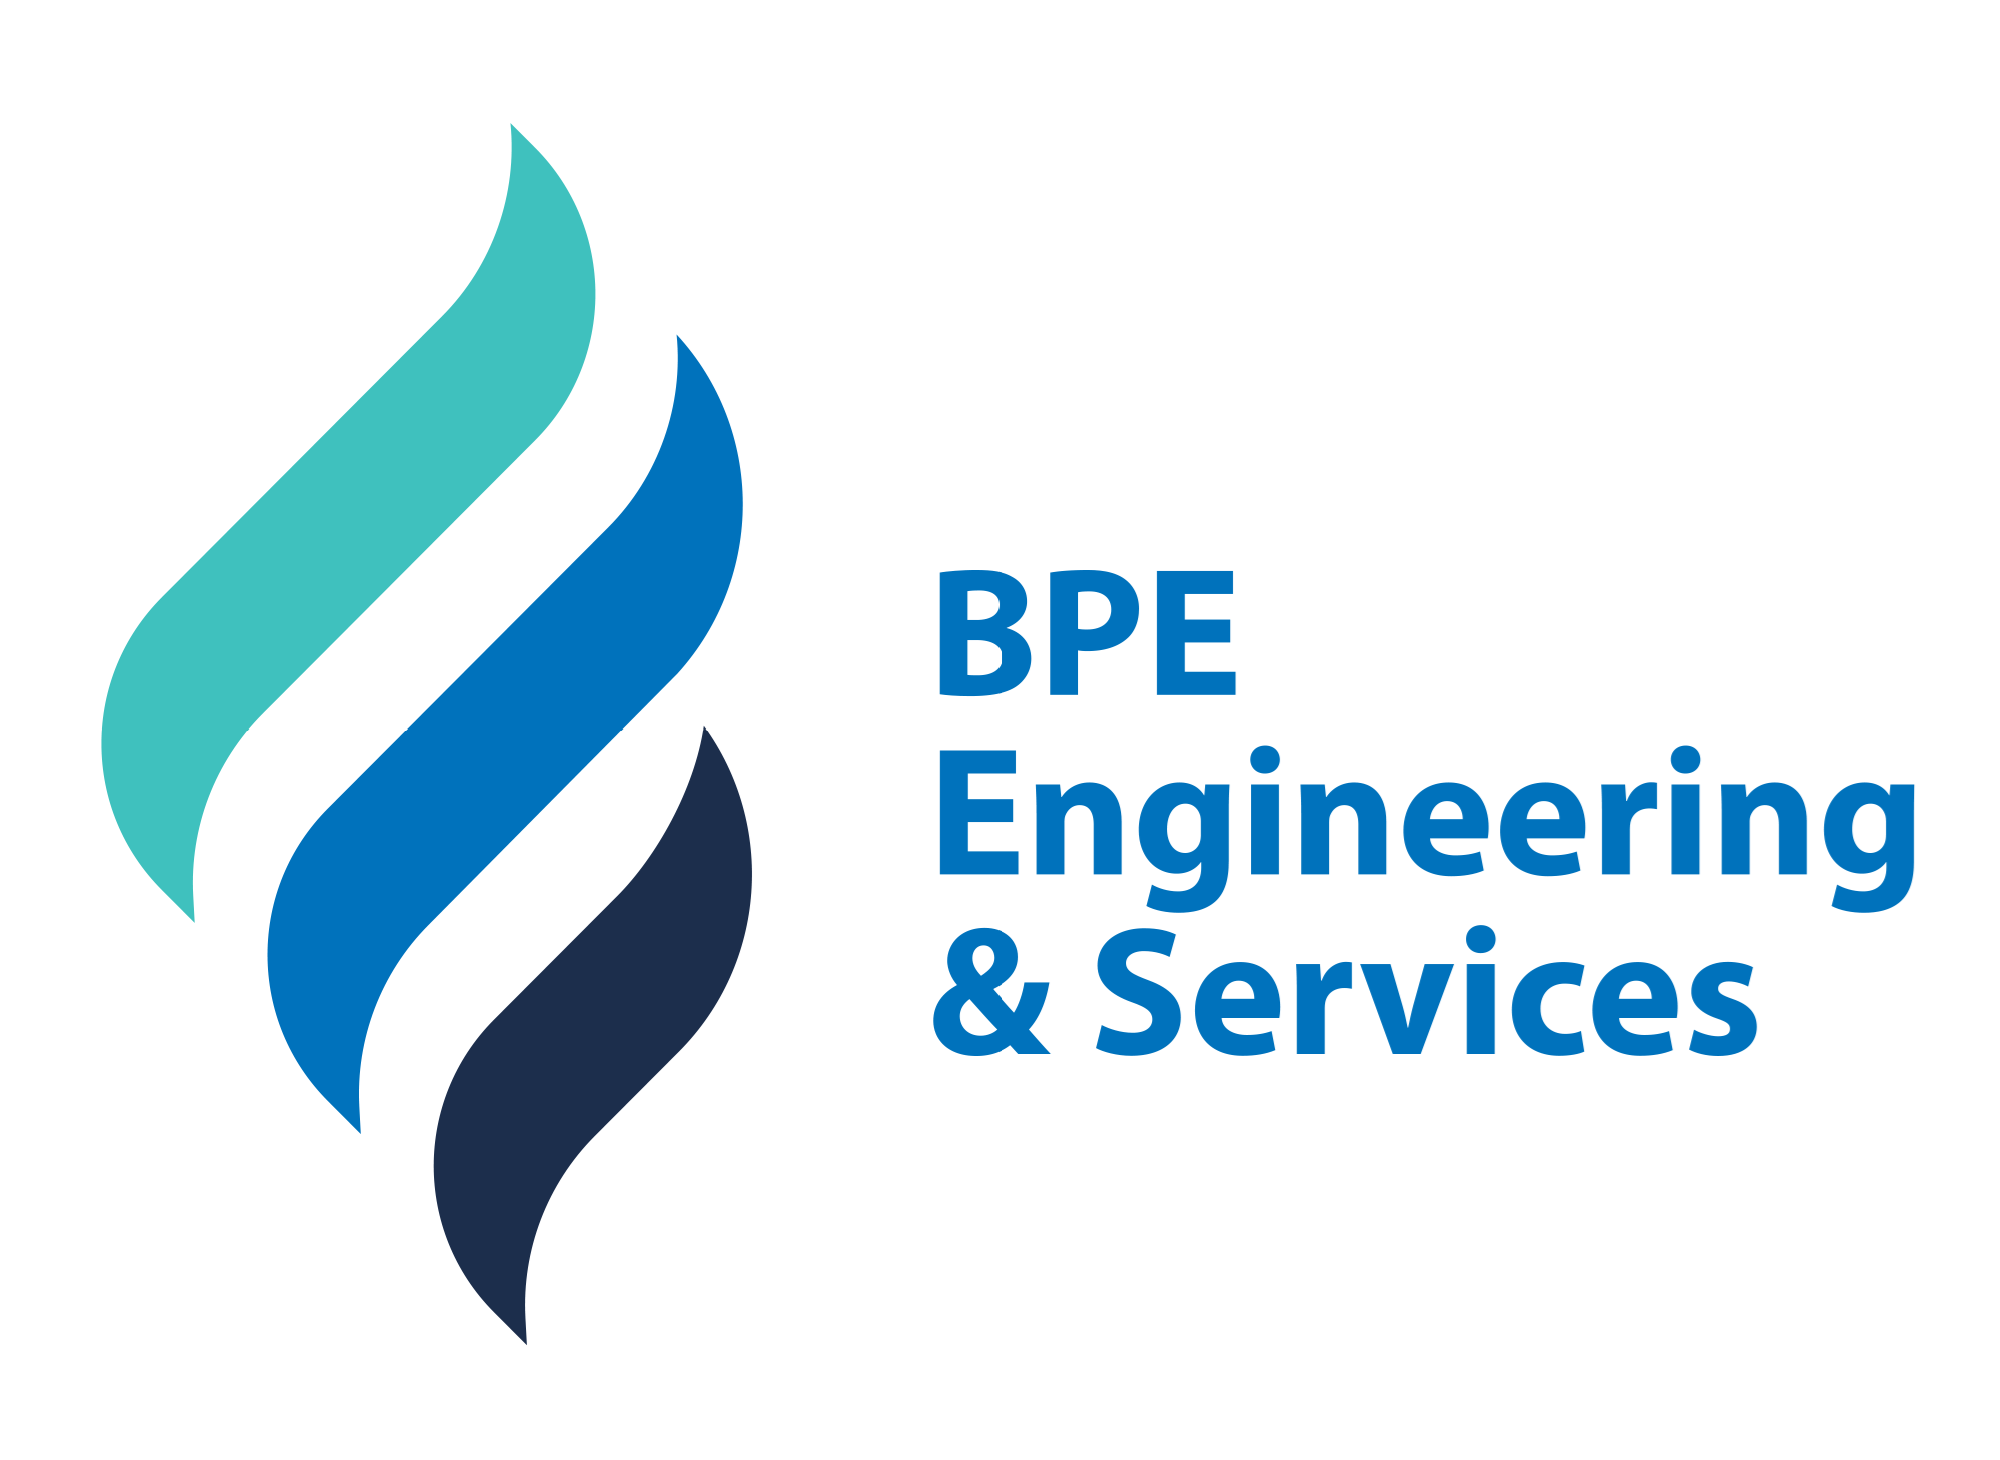 jobs in Bpe Engineering & Services Sdn Bhd